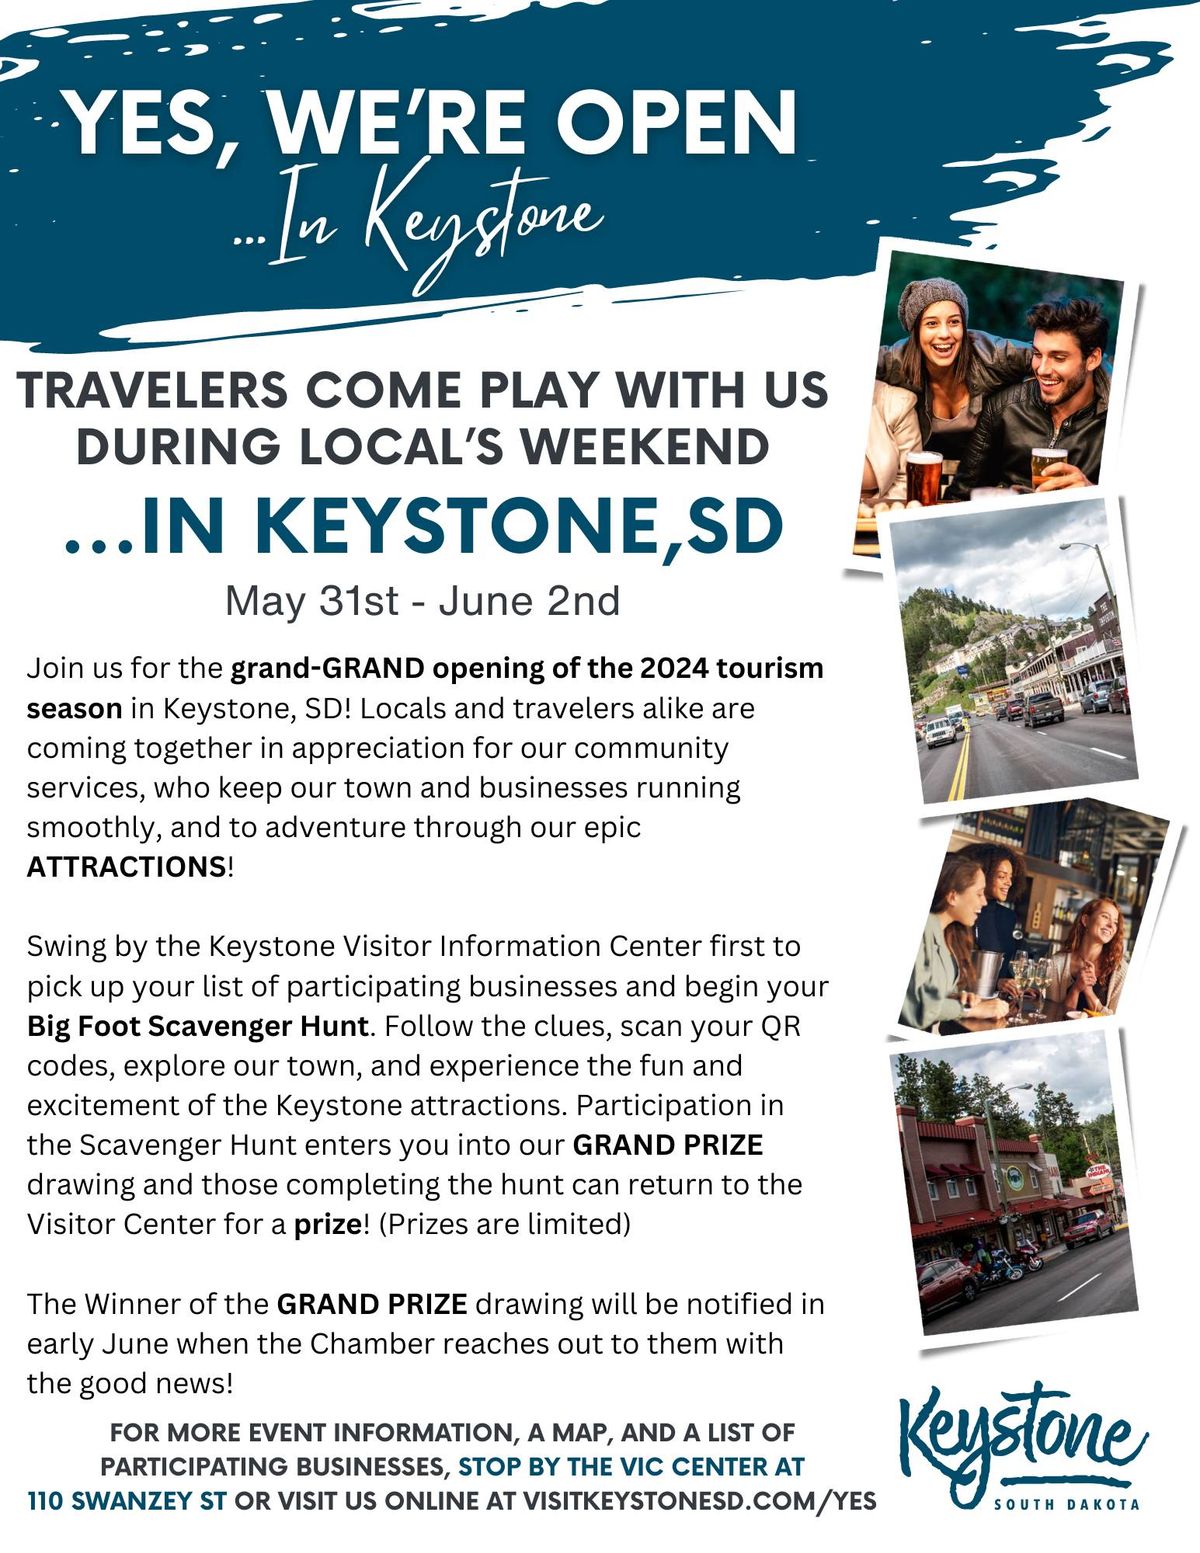 Yes, We're Open...Travelers Come Play with Us During Local's Weekend...In Keystone, SD